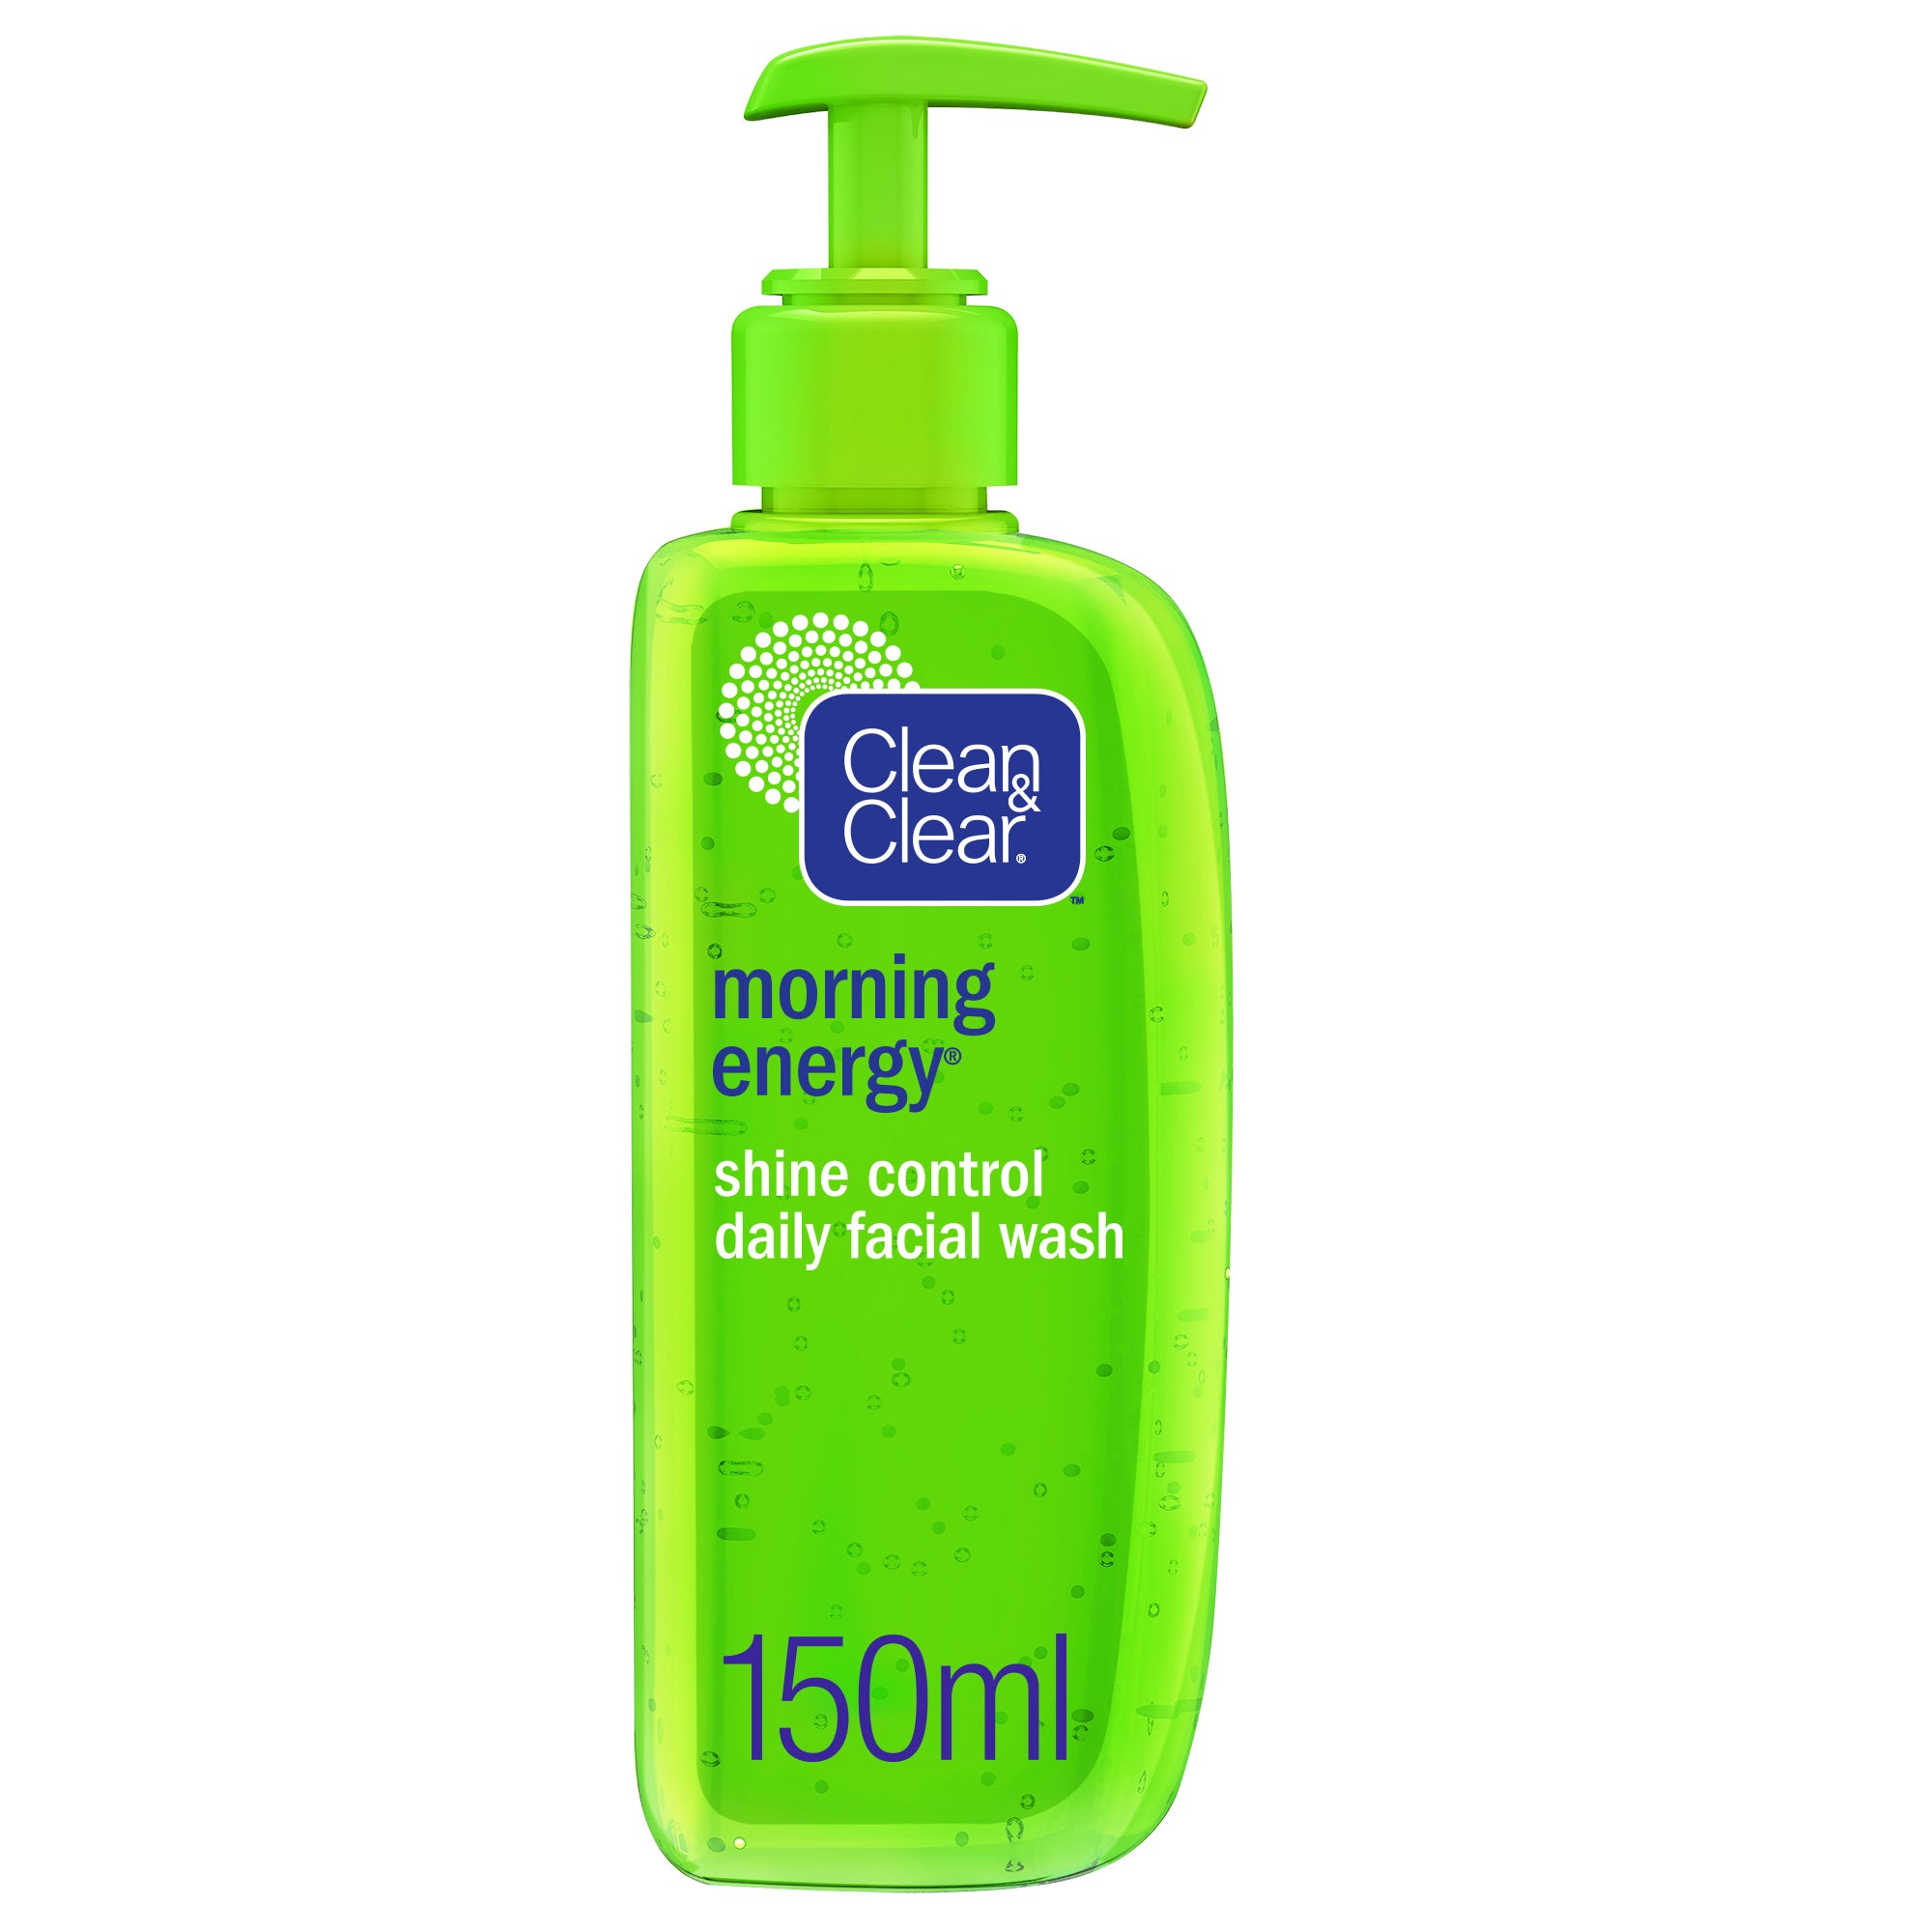 Clean & Clear - Morning Energy Shine Control Daily Facial Wash Oil Free 150ml